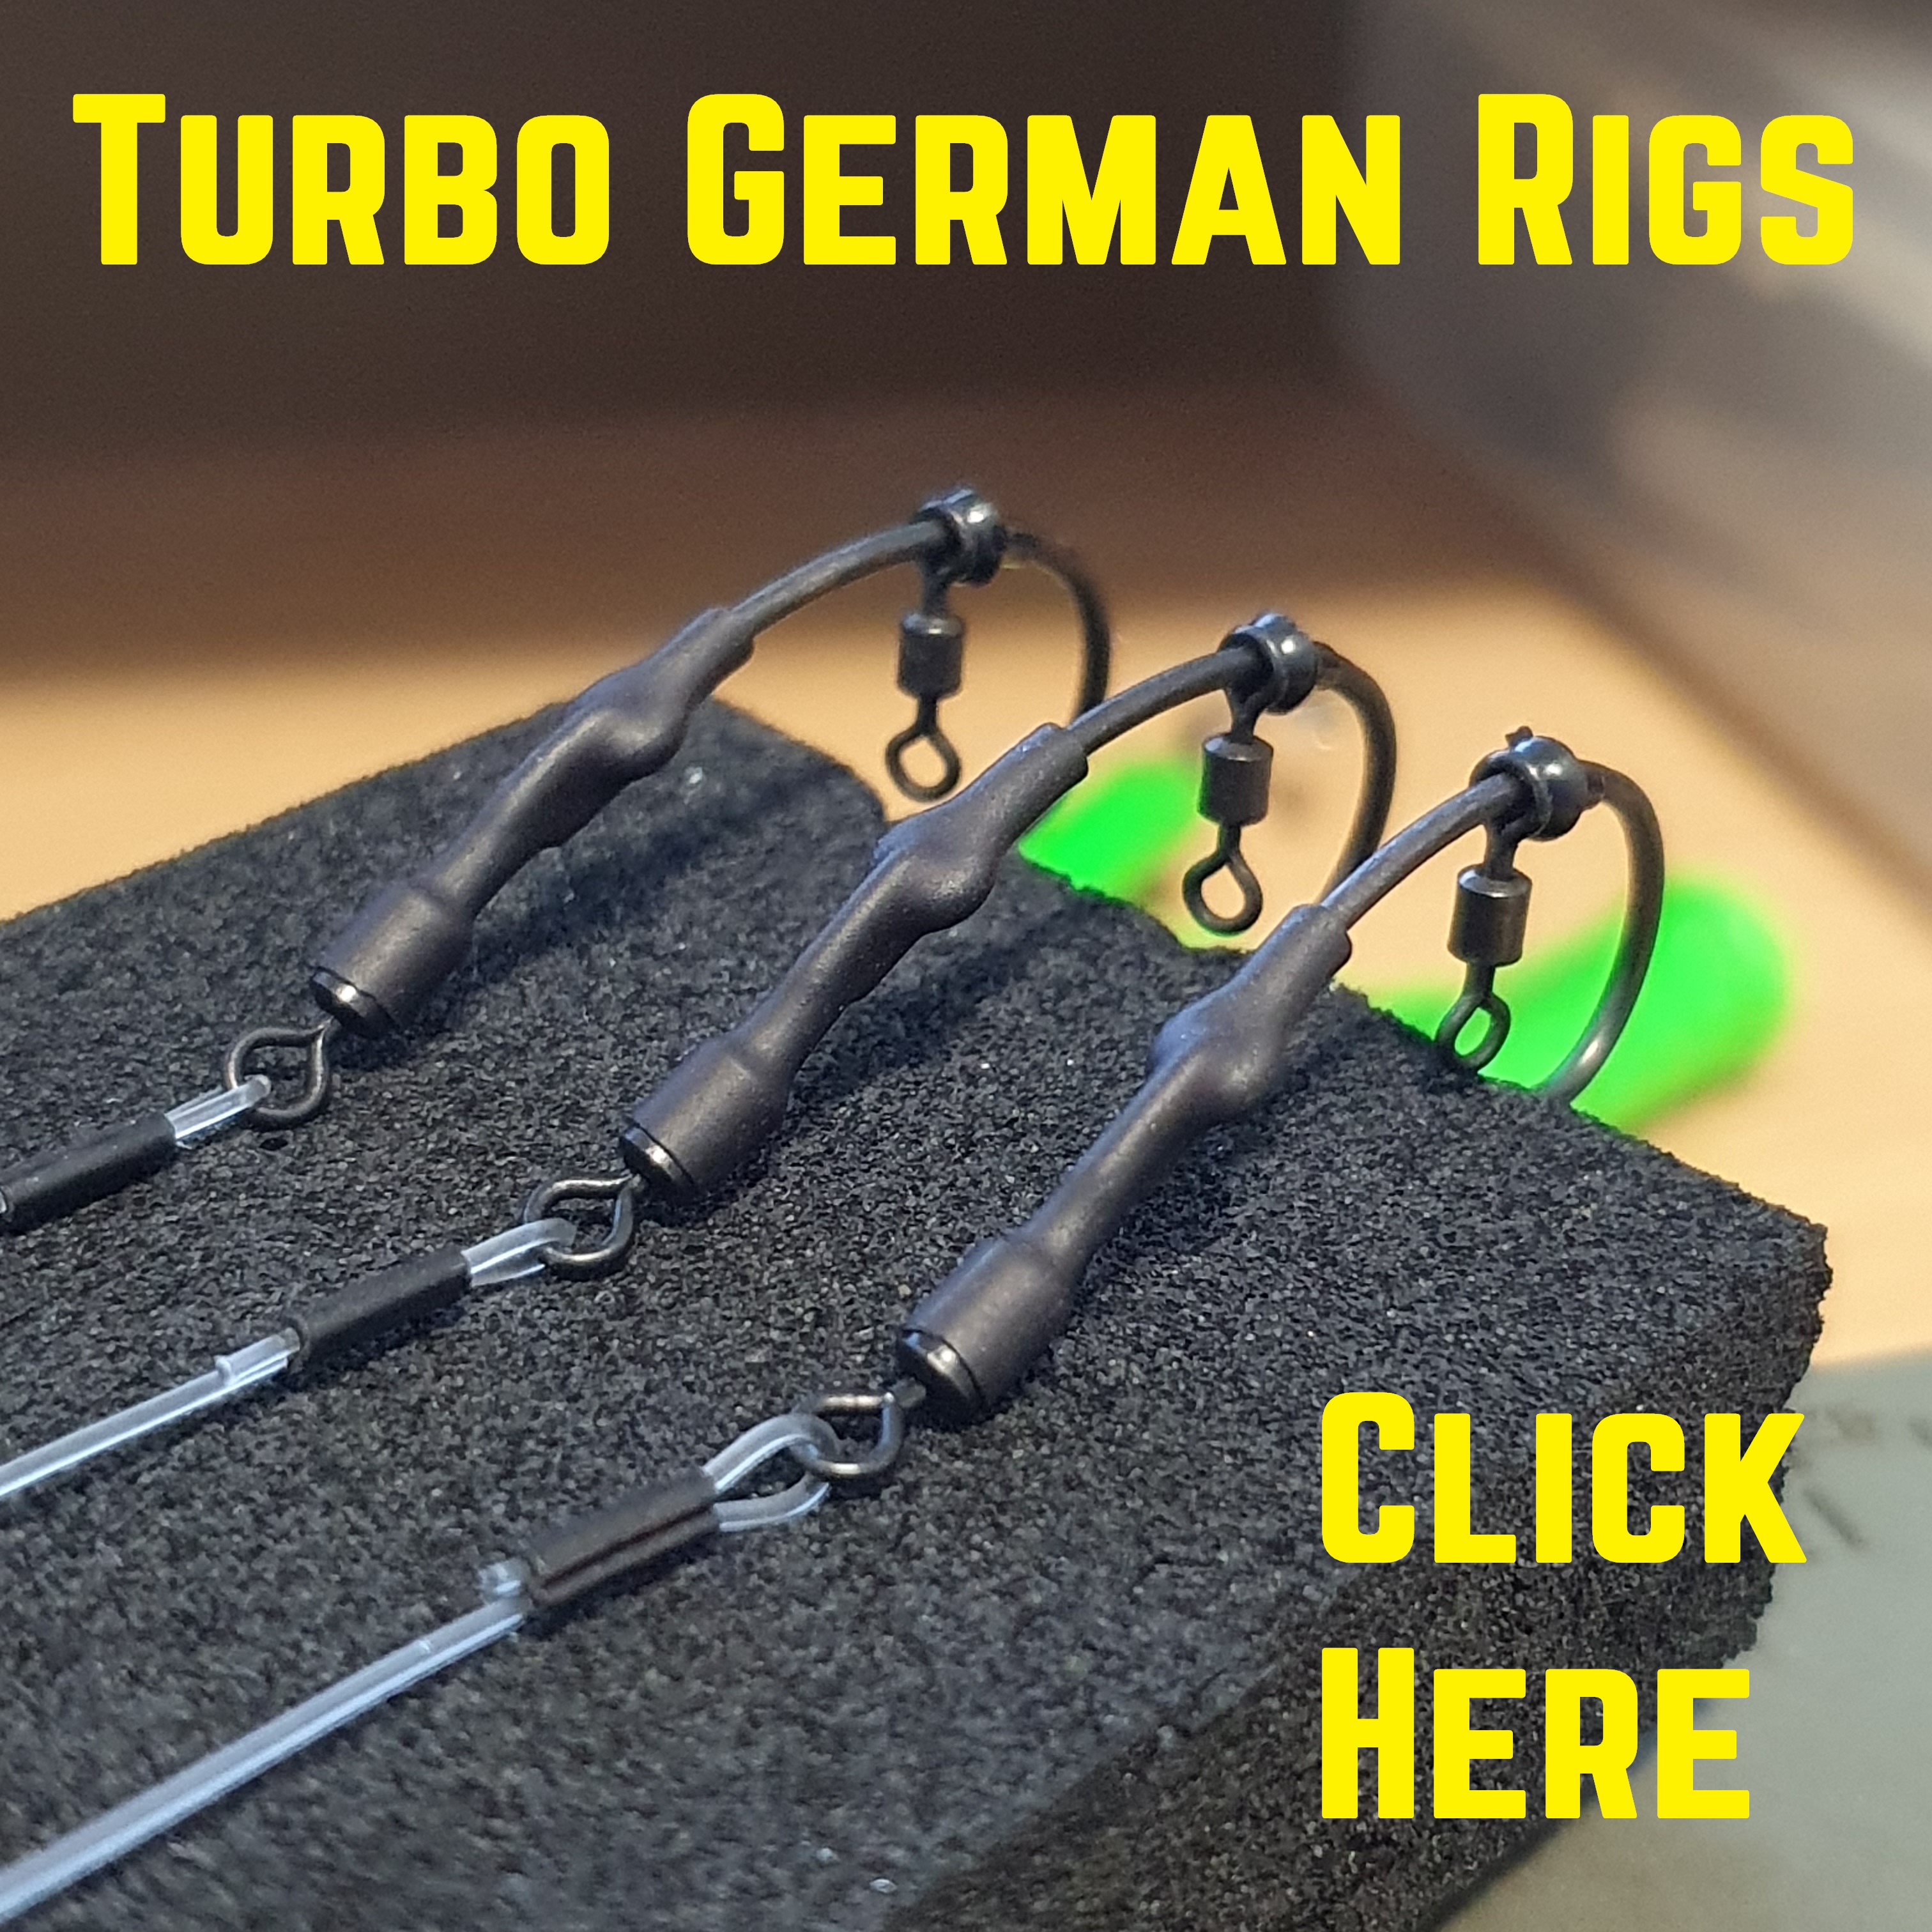 Please take a look at our other Turbo German Rig listings